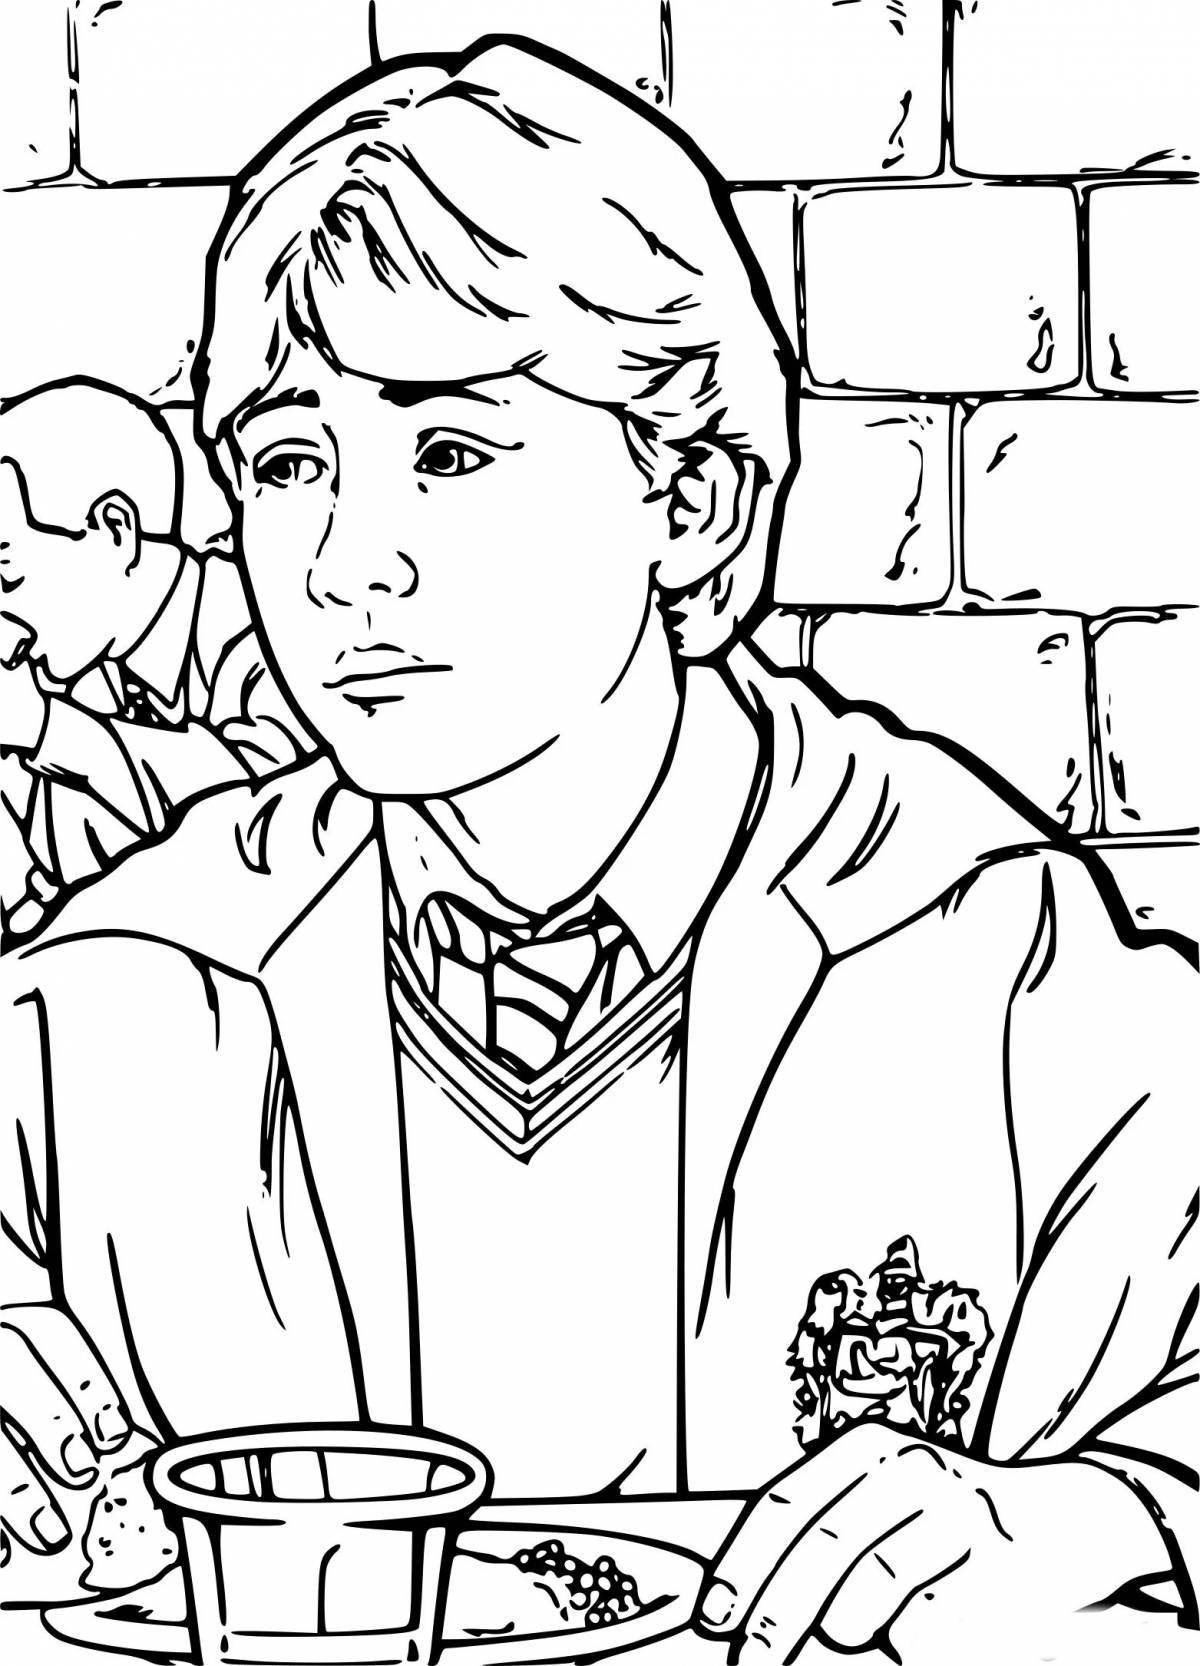 Glowing incorrigible ron coloring page